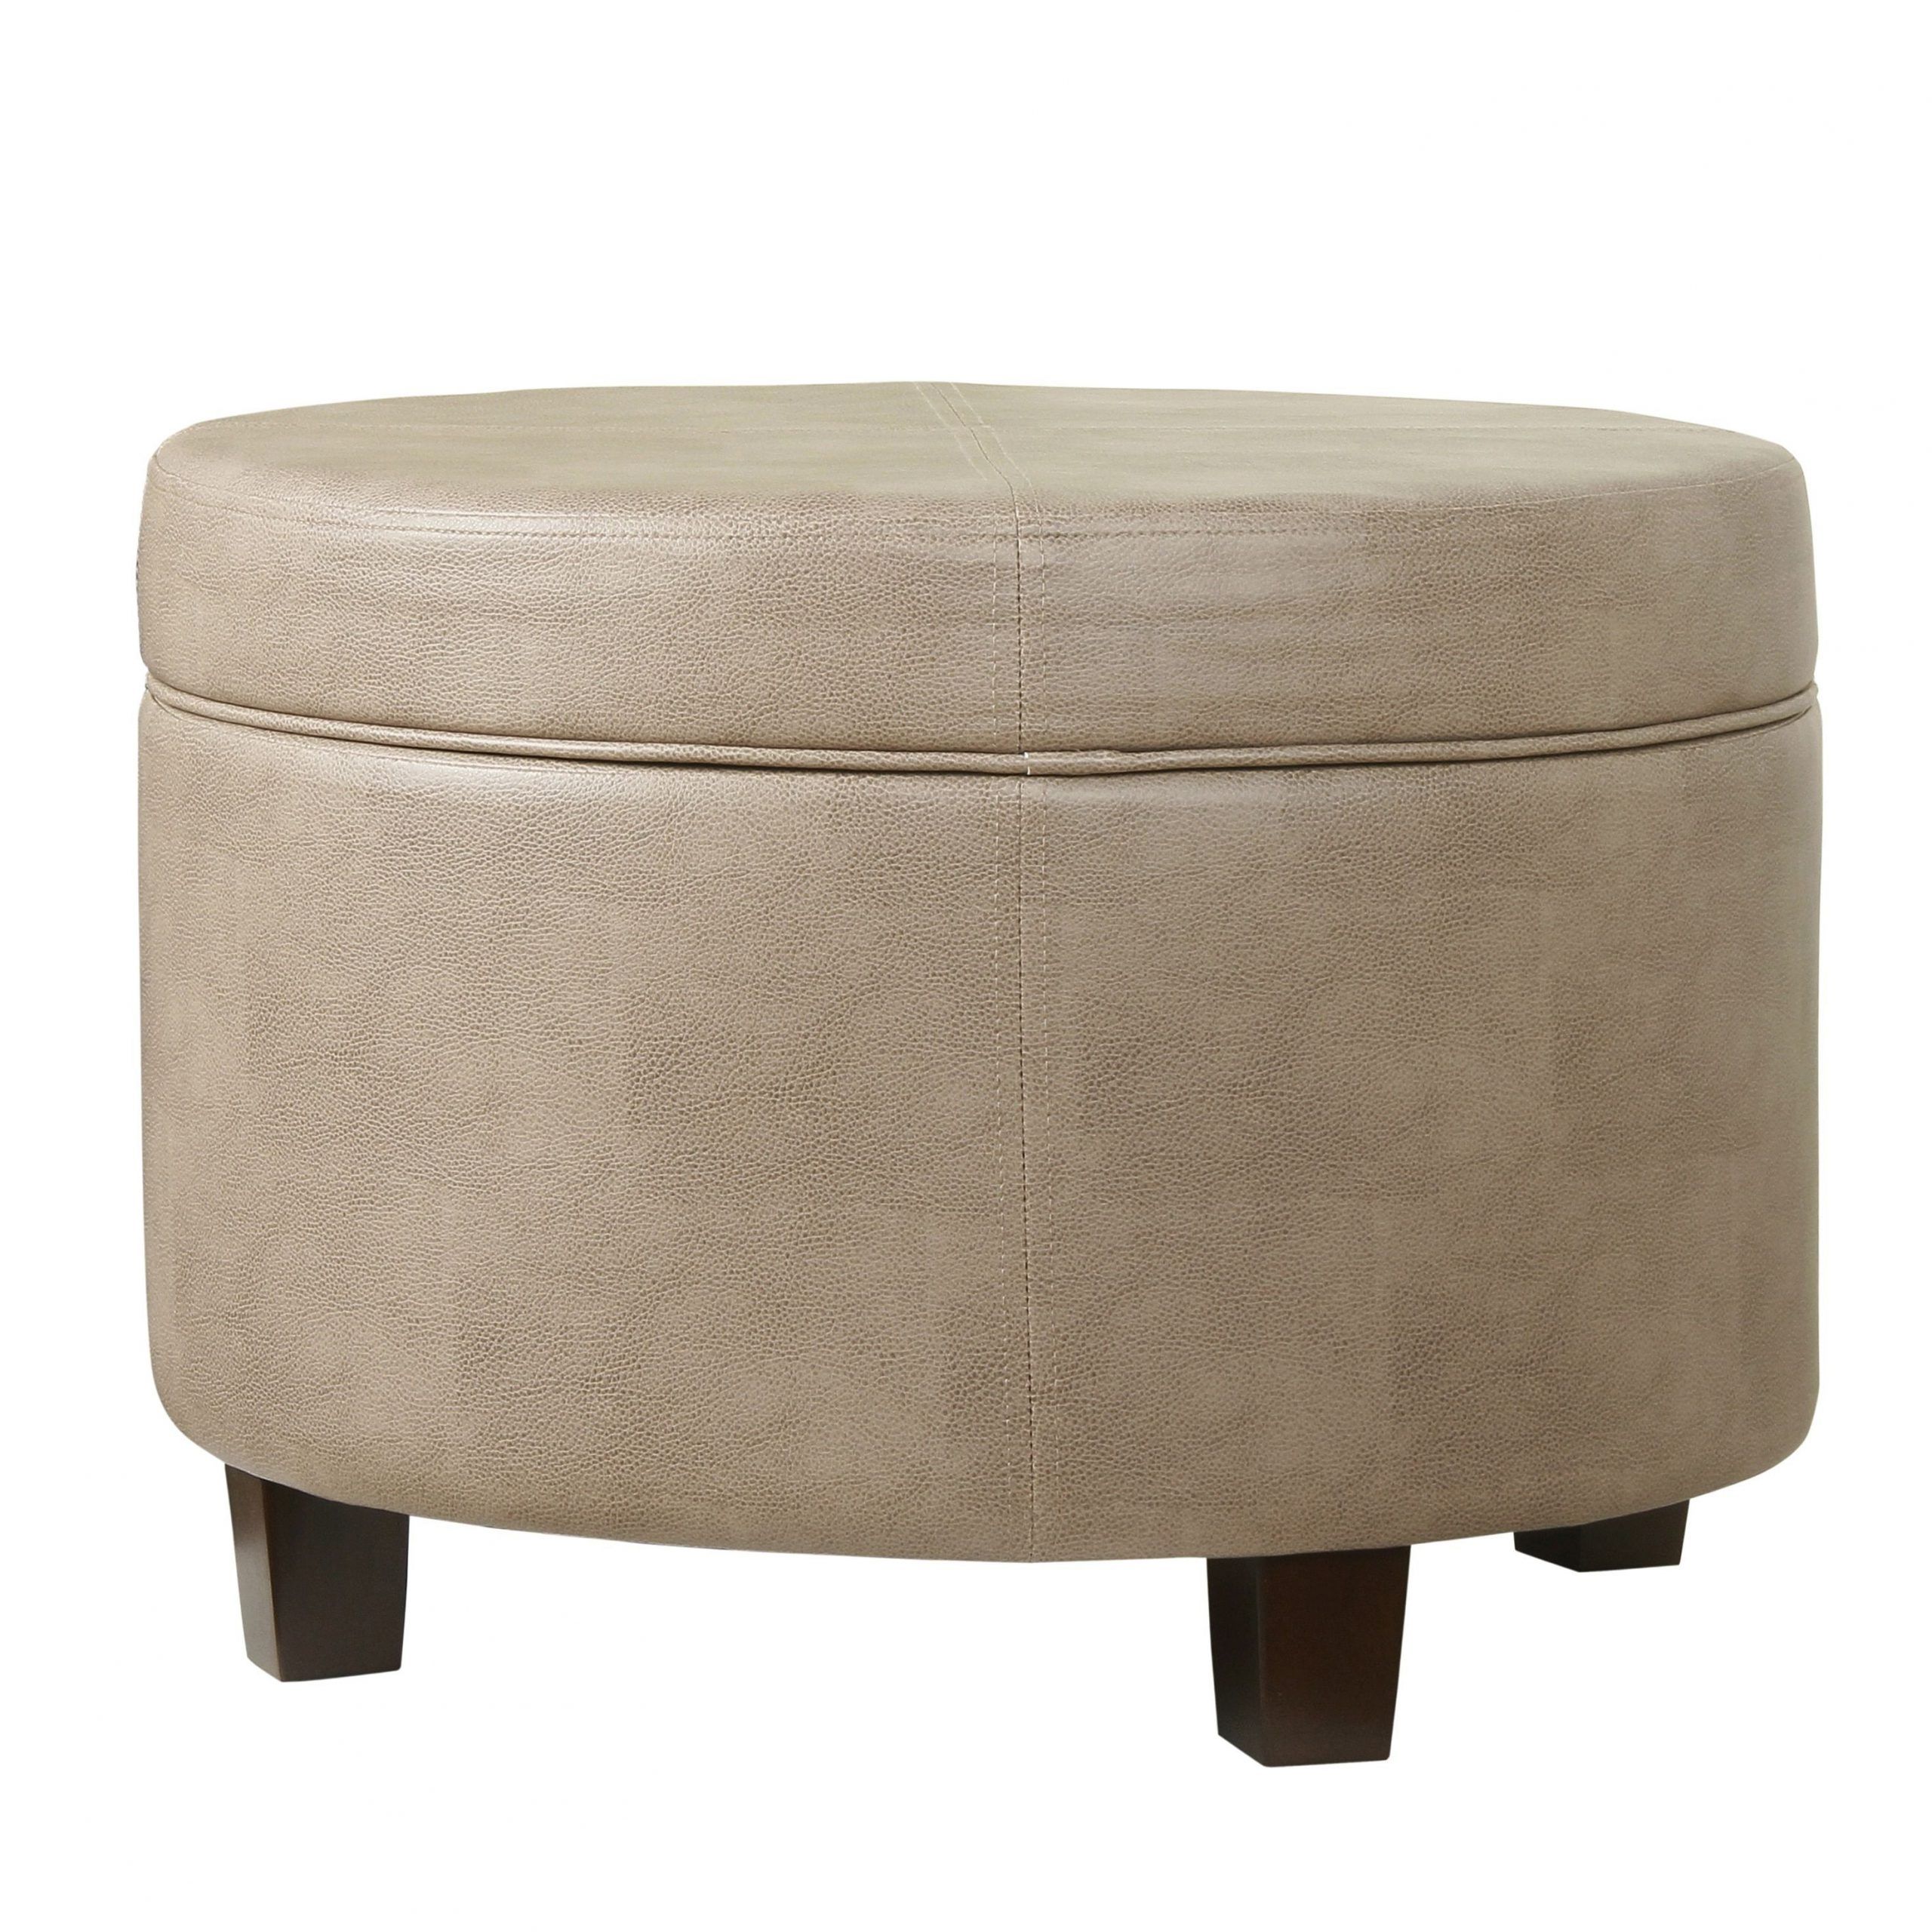 Preferred Silver And White Leather Round Ottomans With Regard To Refurbished Homepop Round Faux Leather Storage Ottoman – Taupe (brown (View 5 of 10)